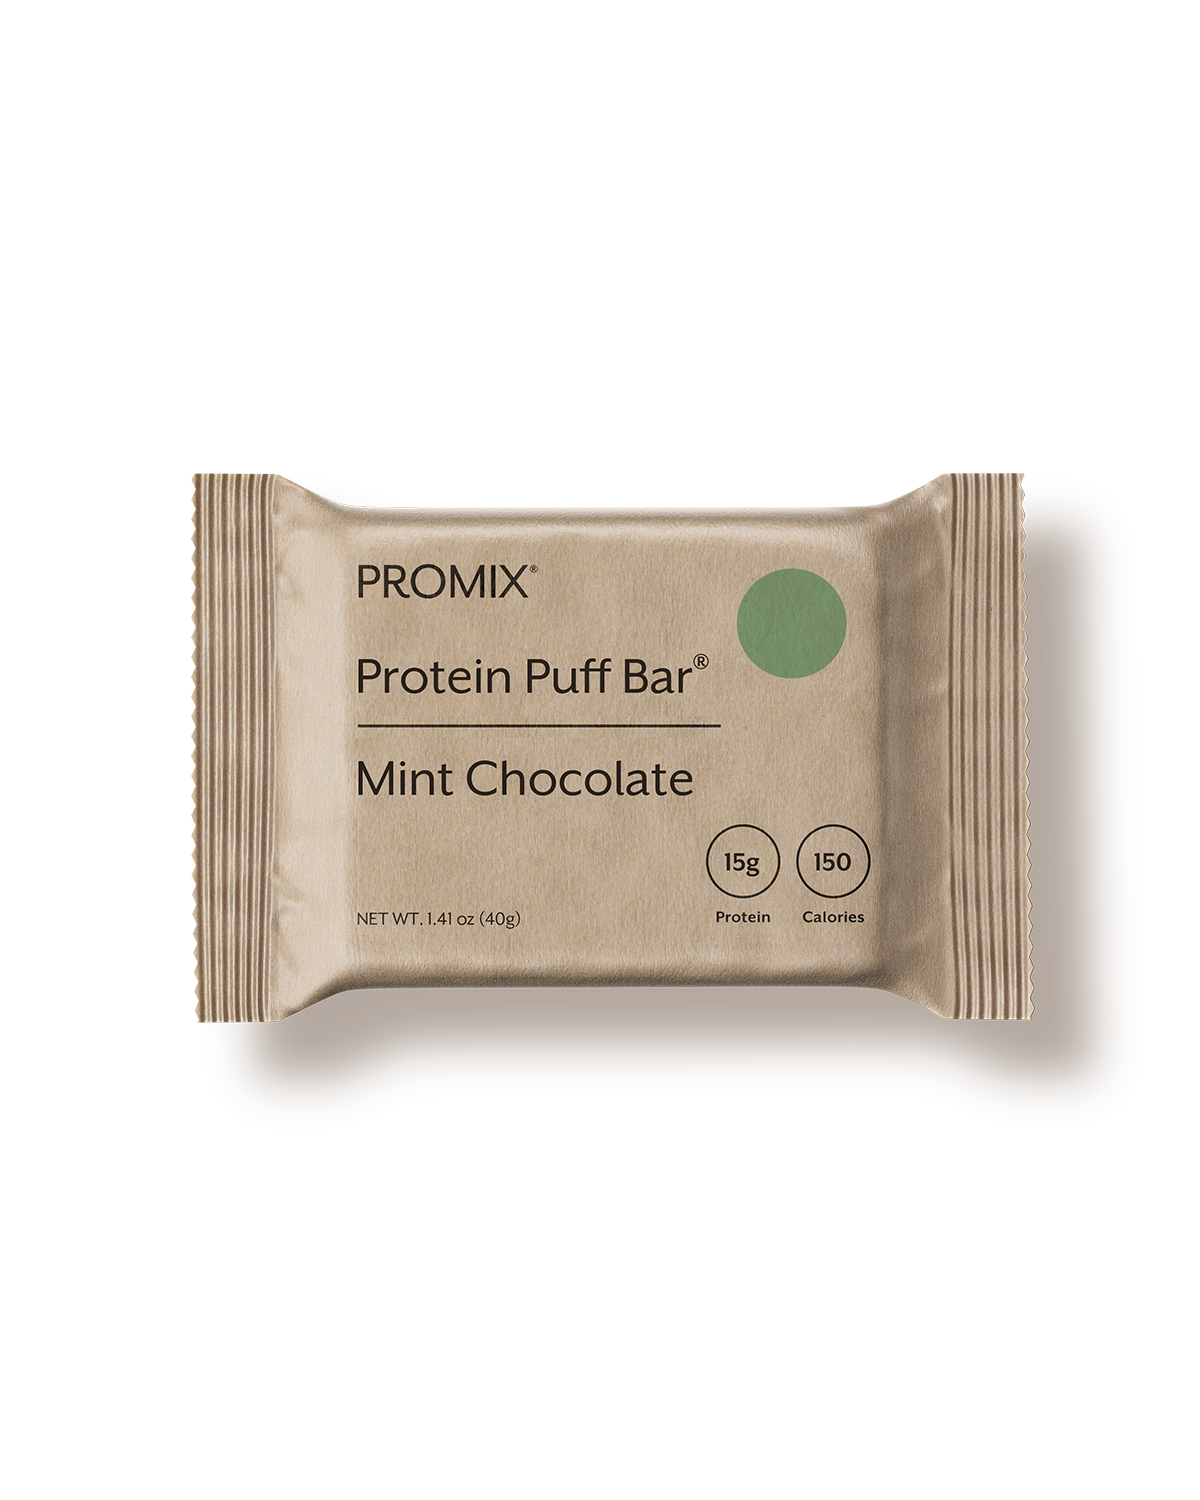 Mint Chocolate Protein Puff Bars, Size: 12 bars